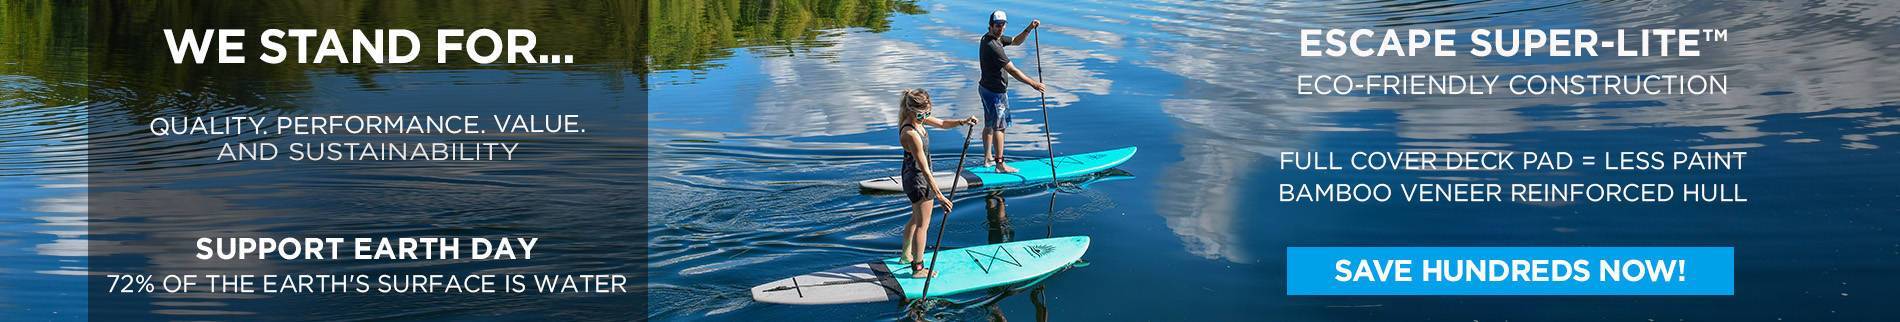 Super-Lite Bamboo / Carbon Reinforced Stand Up Paddle Boards